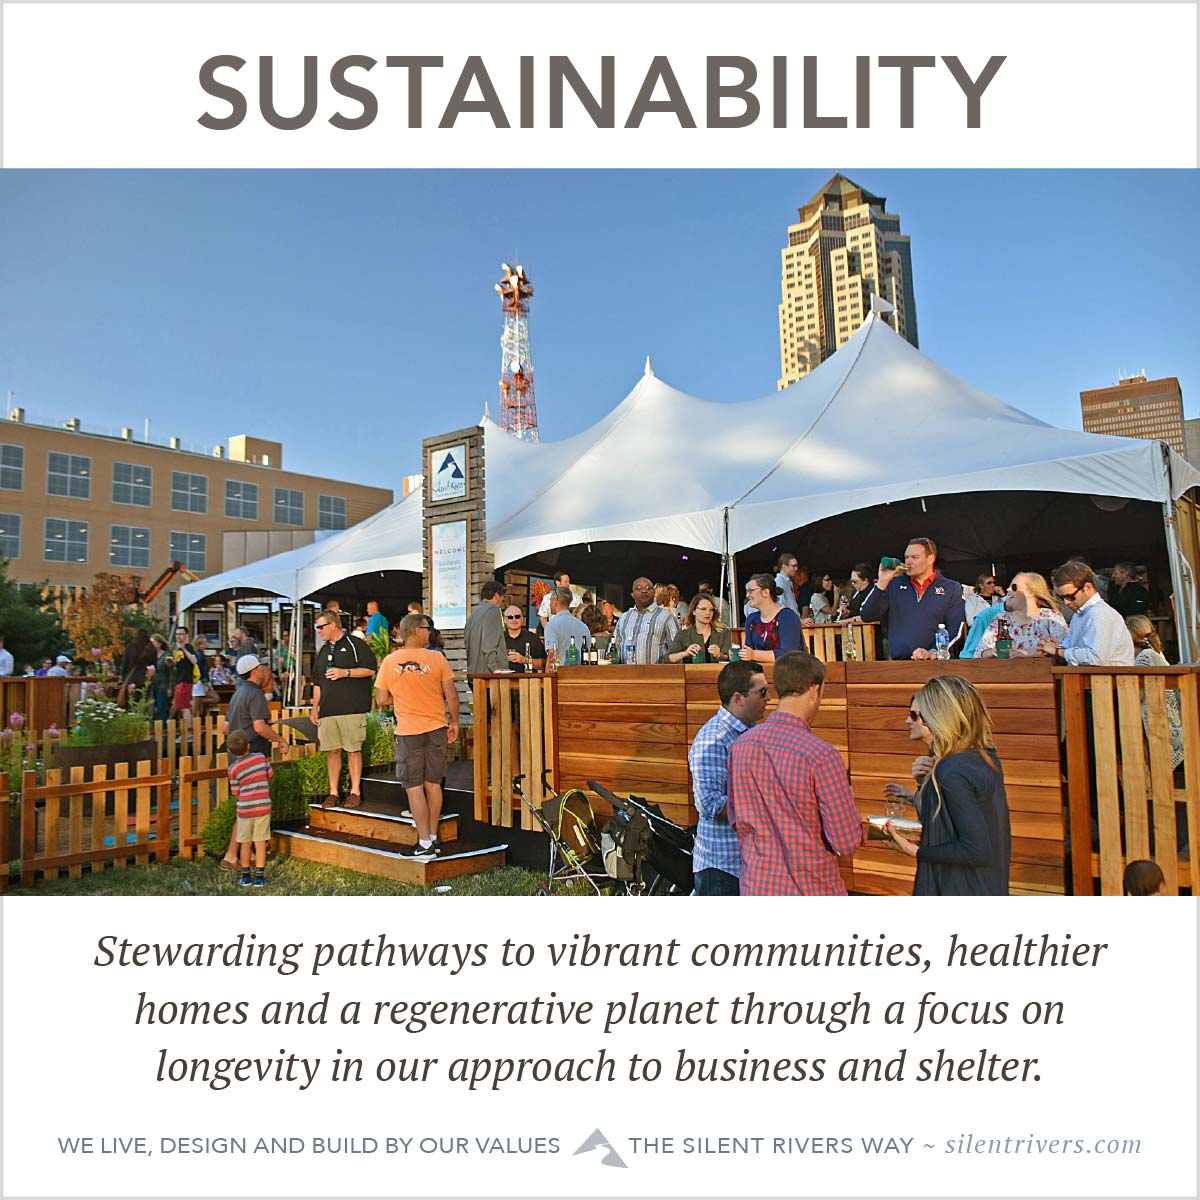 Silent Rivers values Sustainability, which we define as "Stewarding pathways to vibrant communities, healthier homes and a regenerative planet through a focus on longevity in our approach to business and shelter."